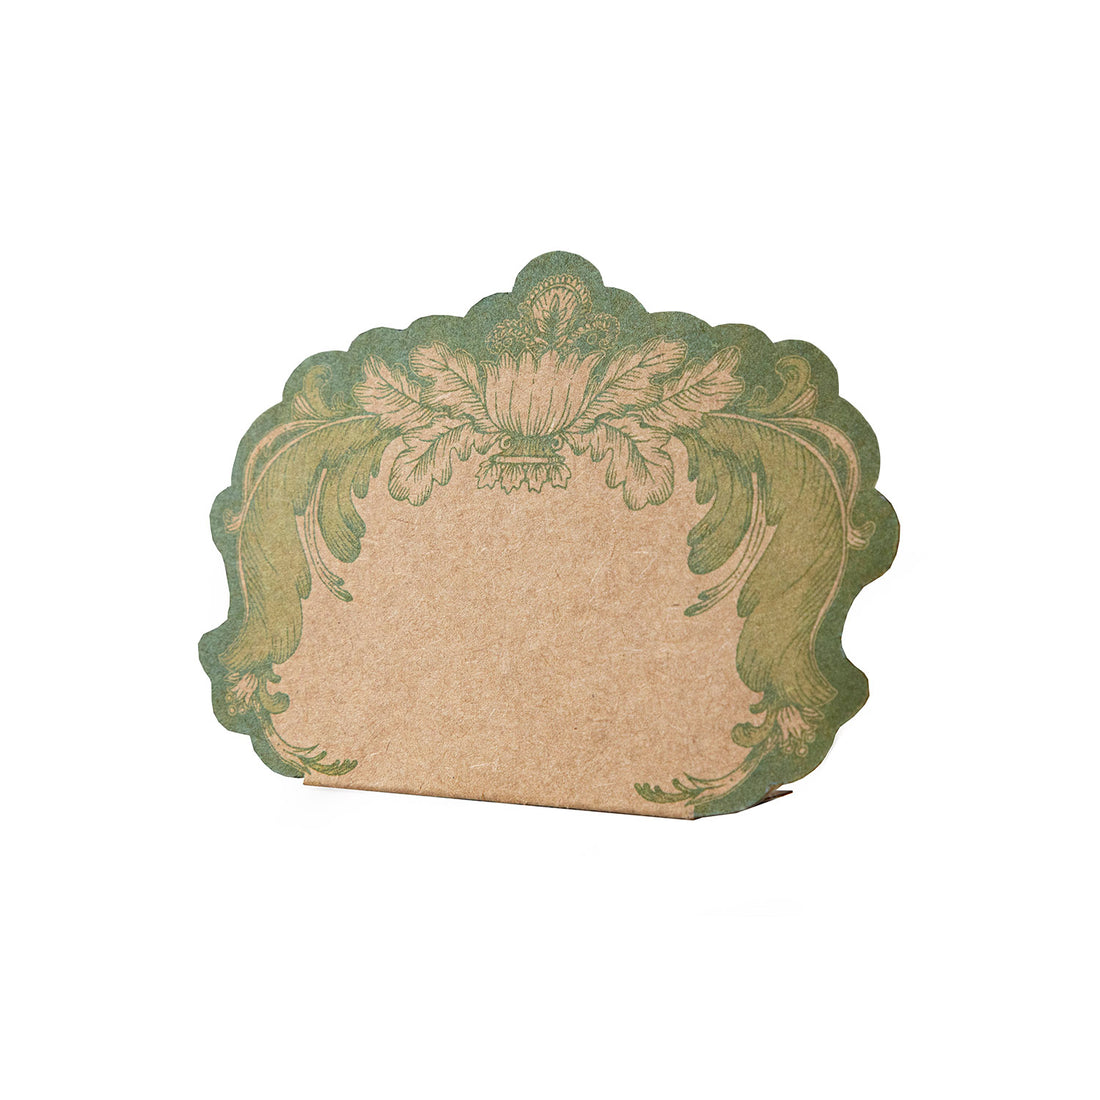 A kraft paper, freestanding place card with an ornate, French toile-style design in green around the edges.